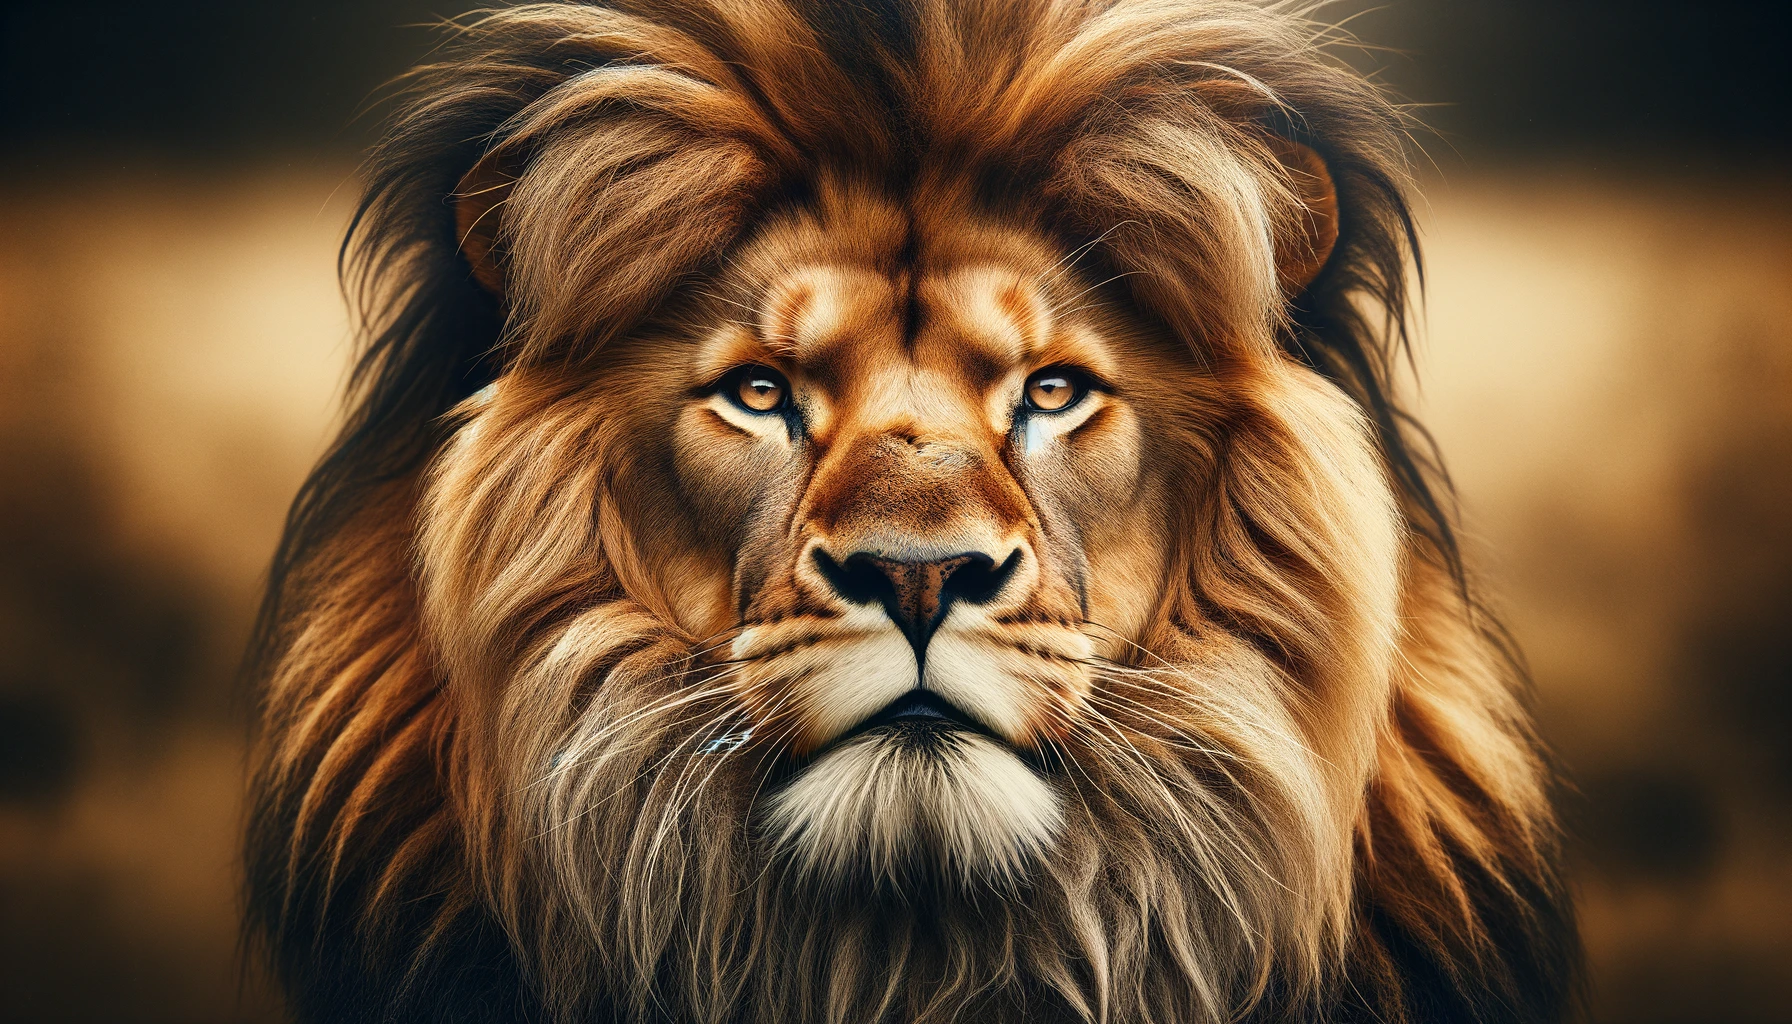 DALL·E 2023-12-07 13.19.27 - Create a wide 16 9 aspect ratio image featuring a real lion with a charismatic and impressive appearance, embodying leadership and strength. The lion